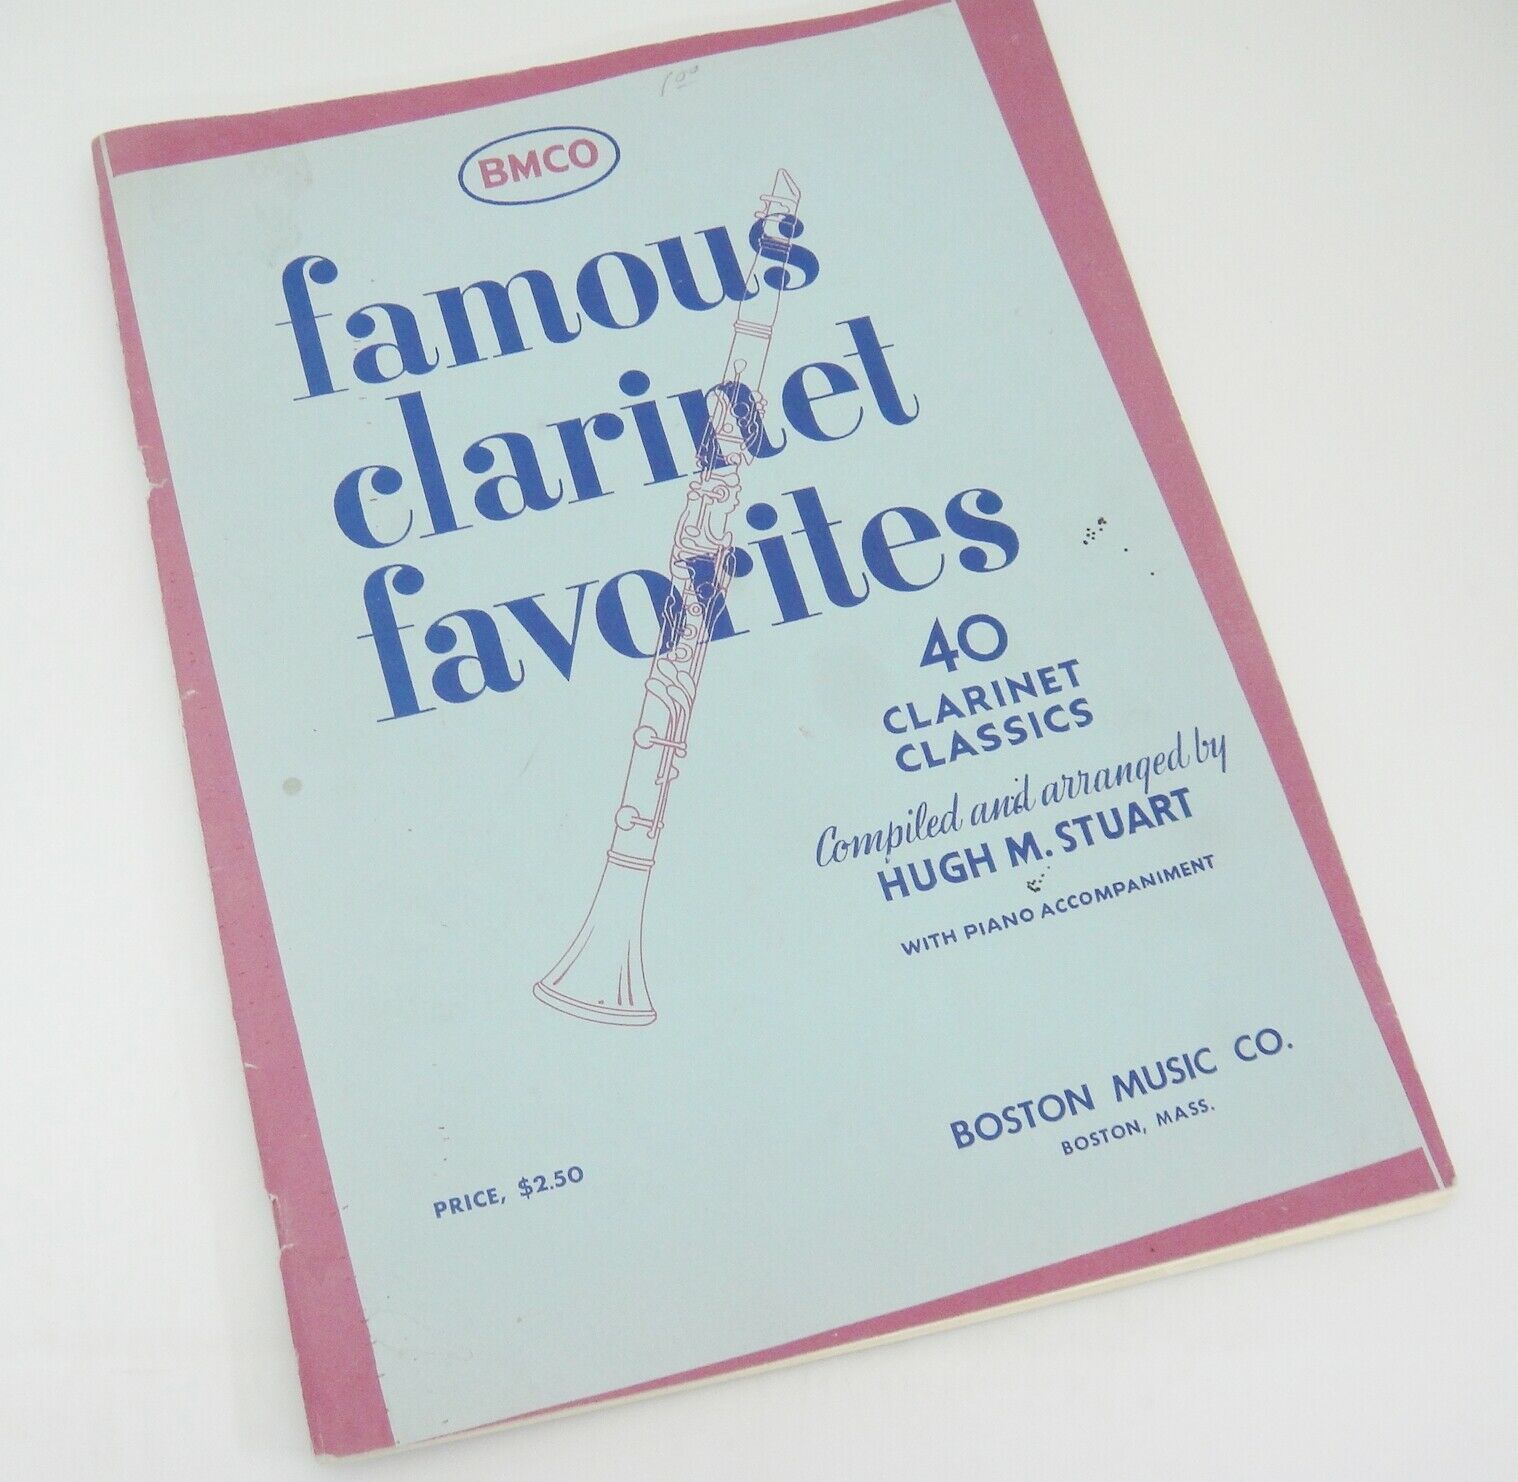 Primary image for Famous Clarinet Favorites 40 Classics by Hugh Stuart w Piano Accompaniment 1963